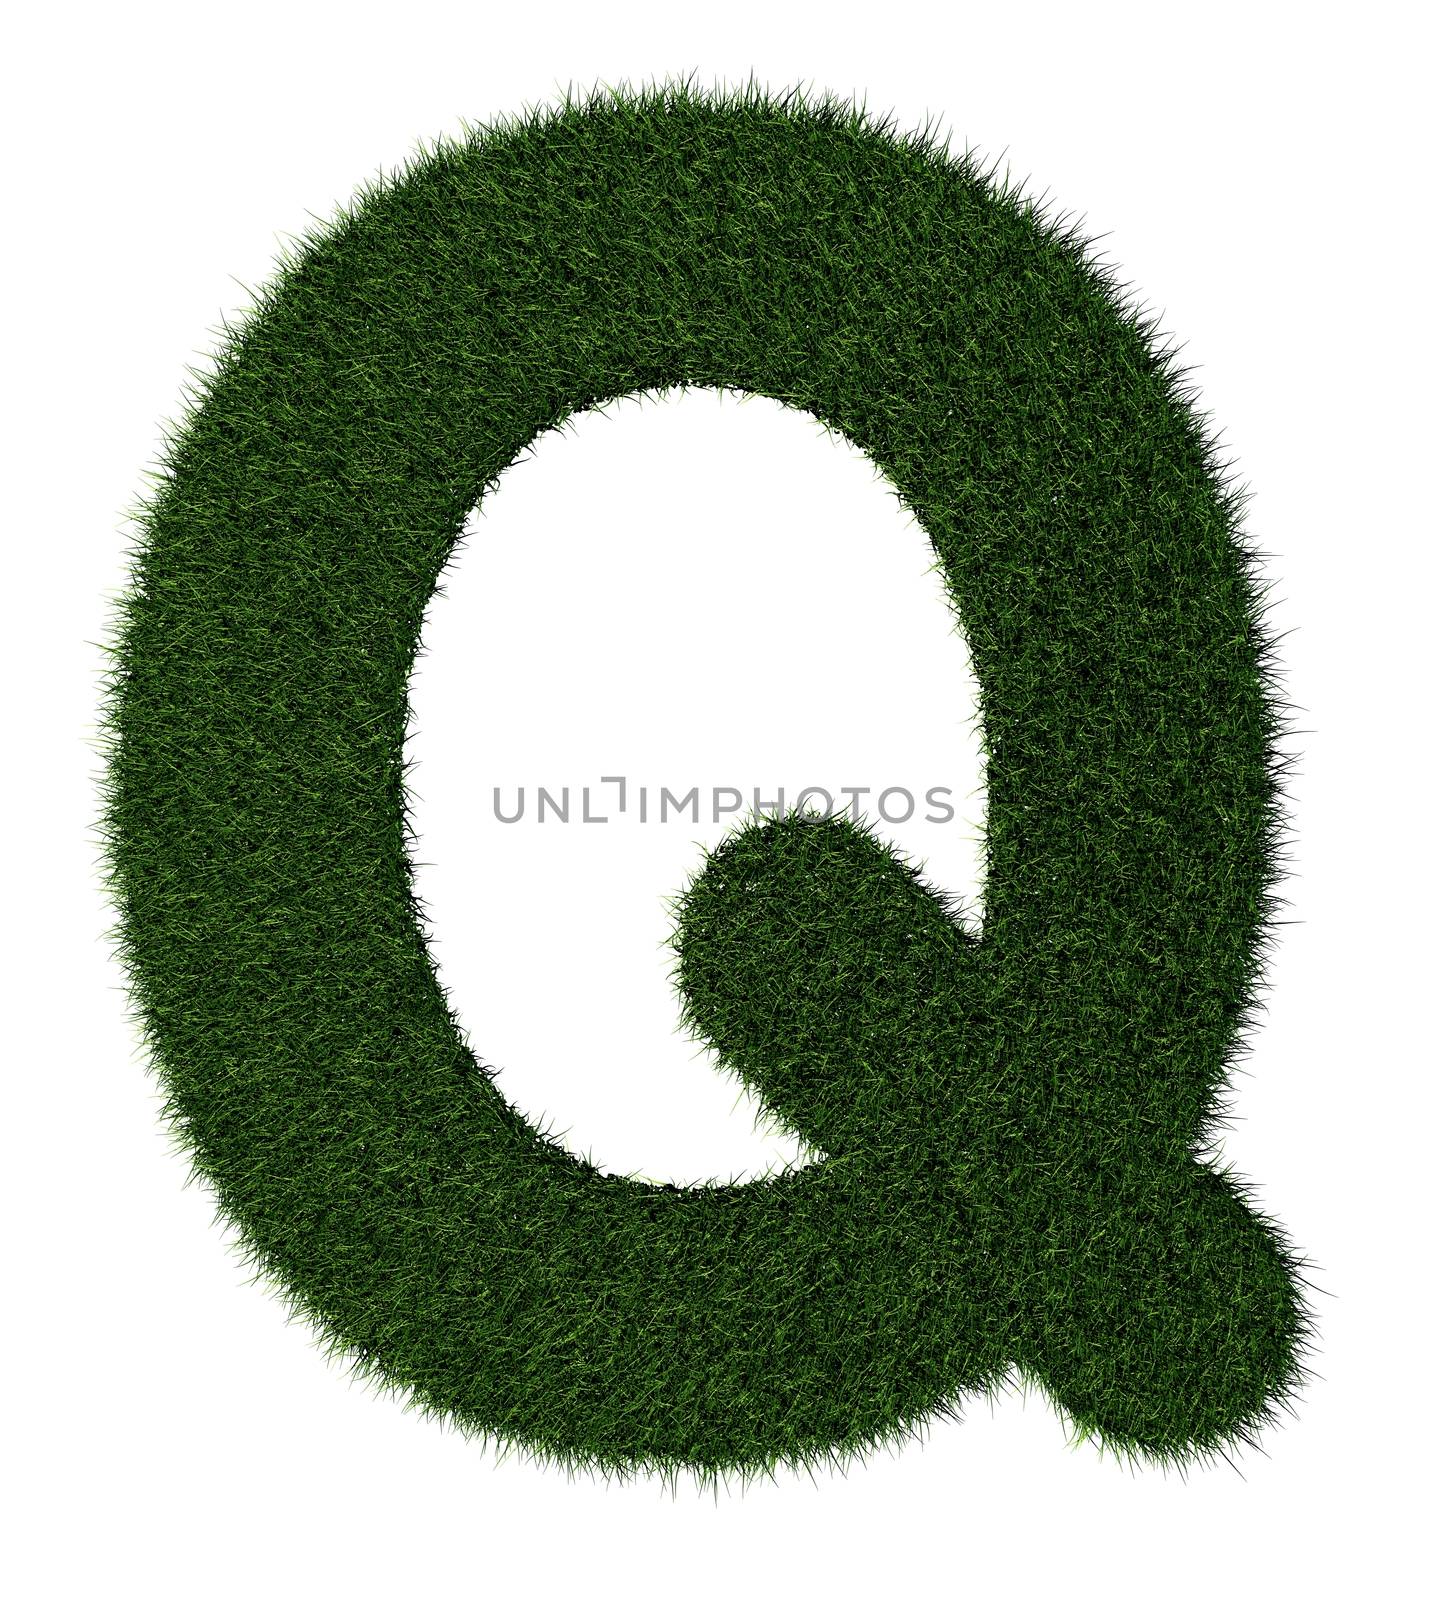 Letter Q made with blades of grass